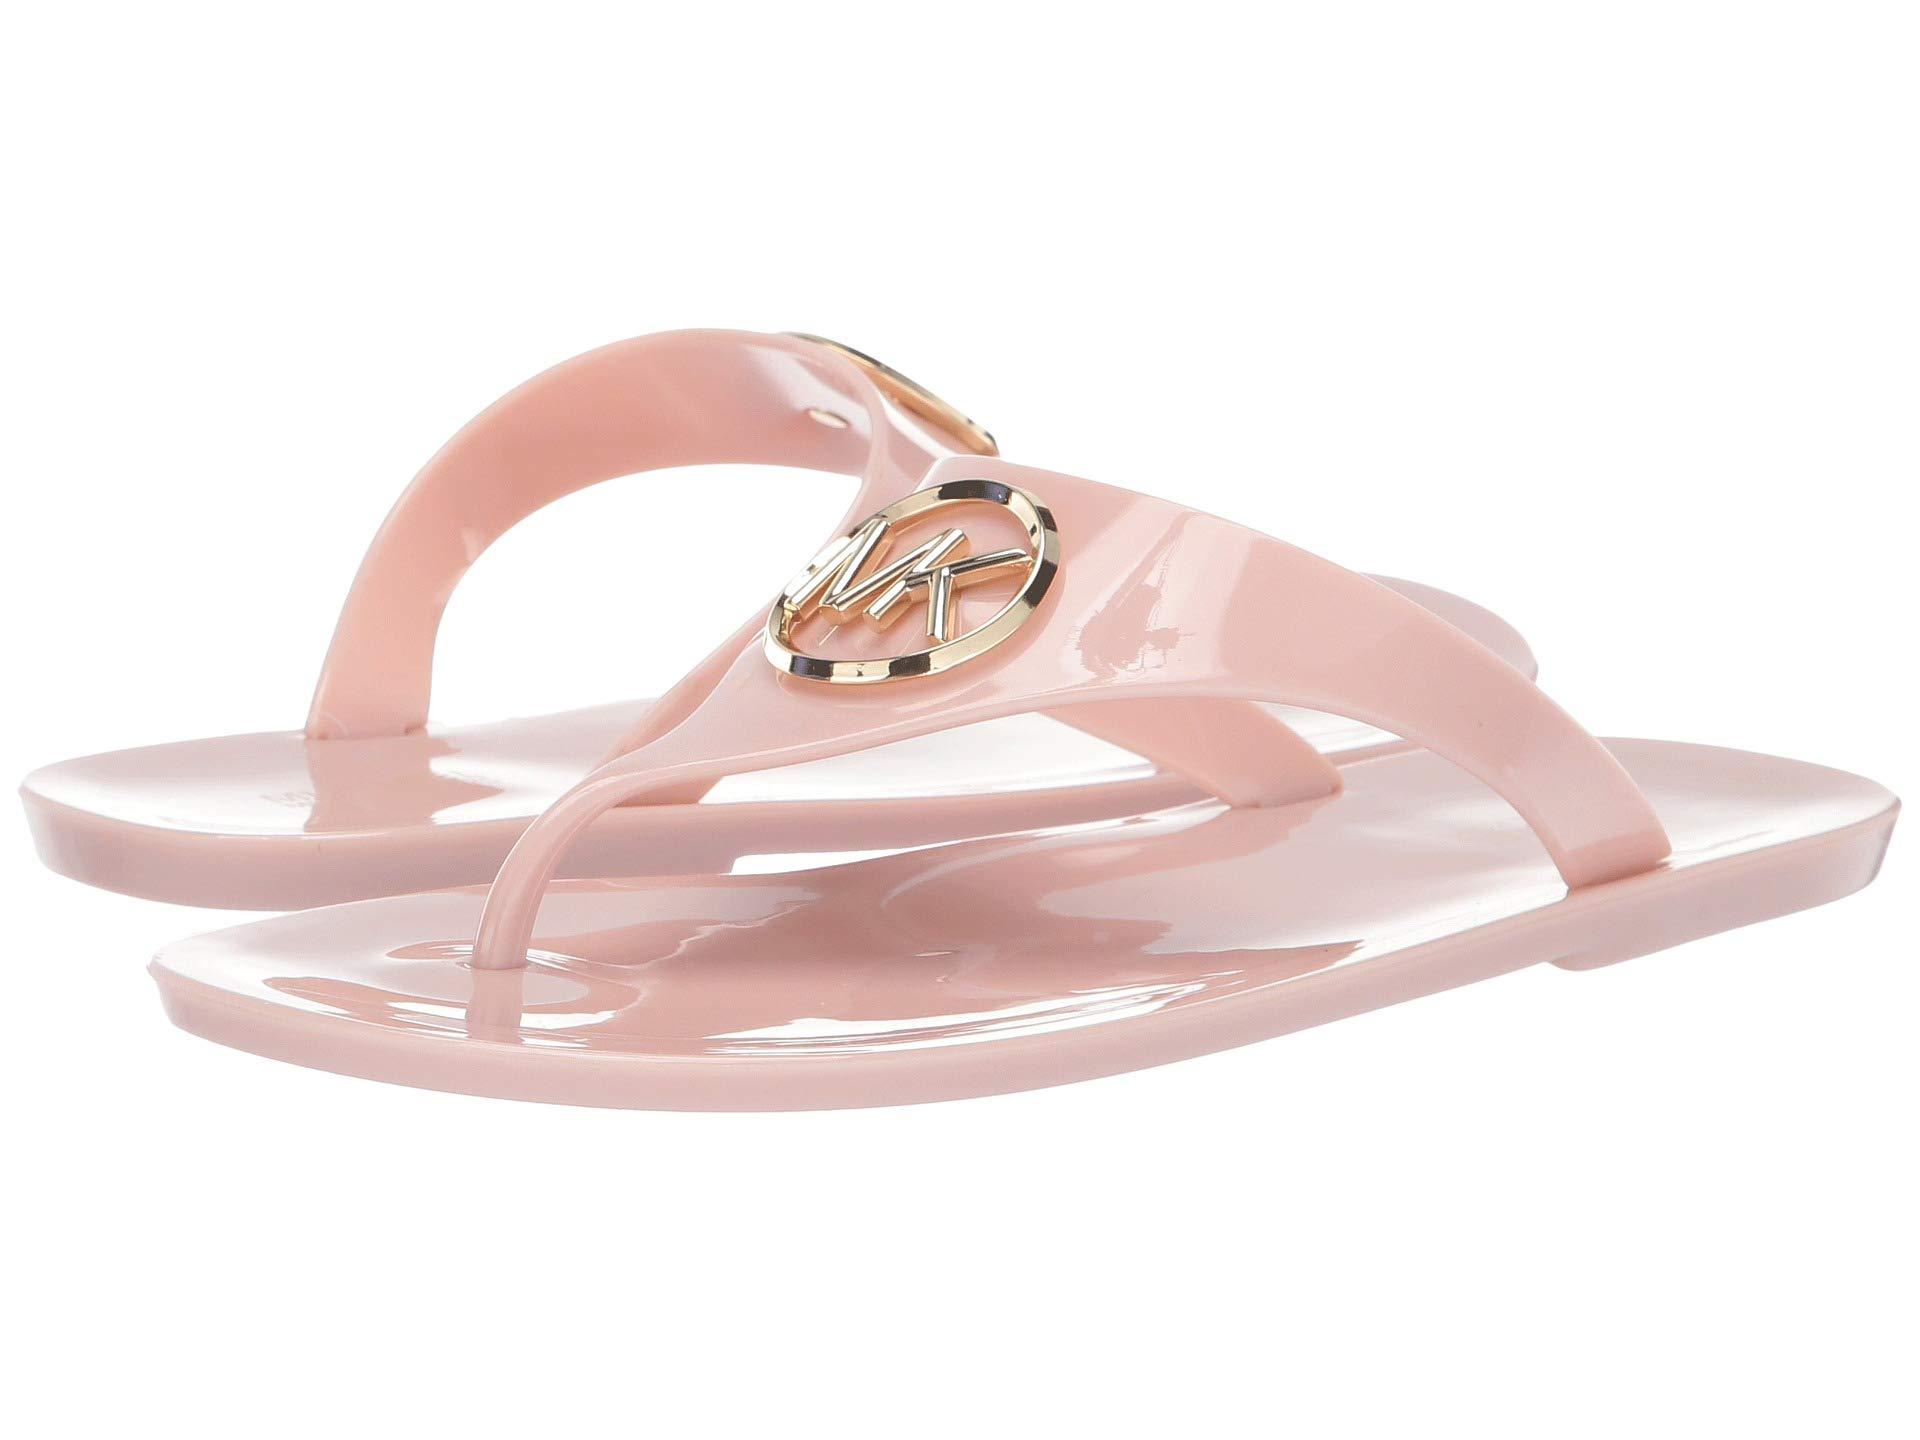 MICHAEL Michael Kors Lillie Jelly Thong in Pink - Lyst